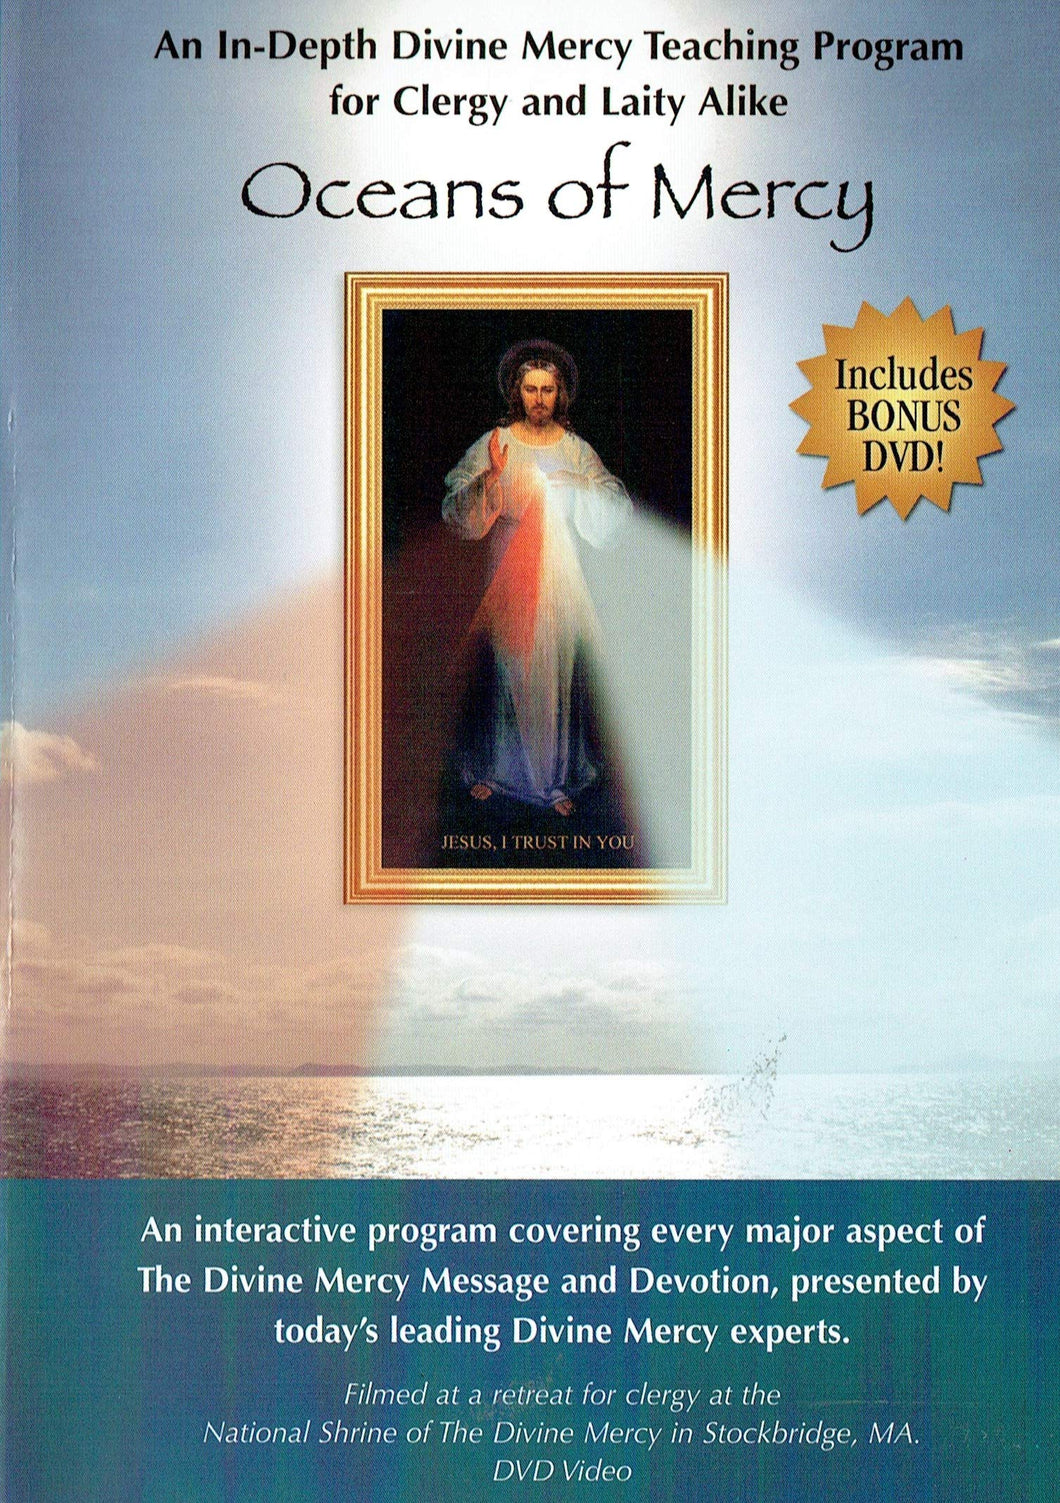 Oceans of Mercy: An In-Depth Divine Mercy Teaching Program for Clergy and Laity Alike